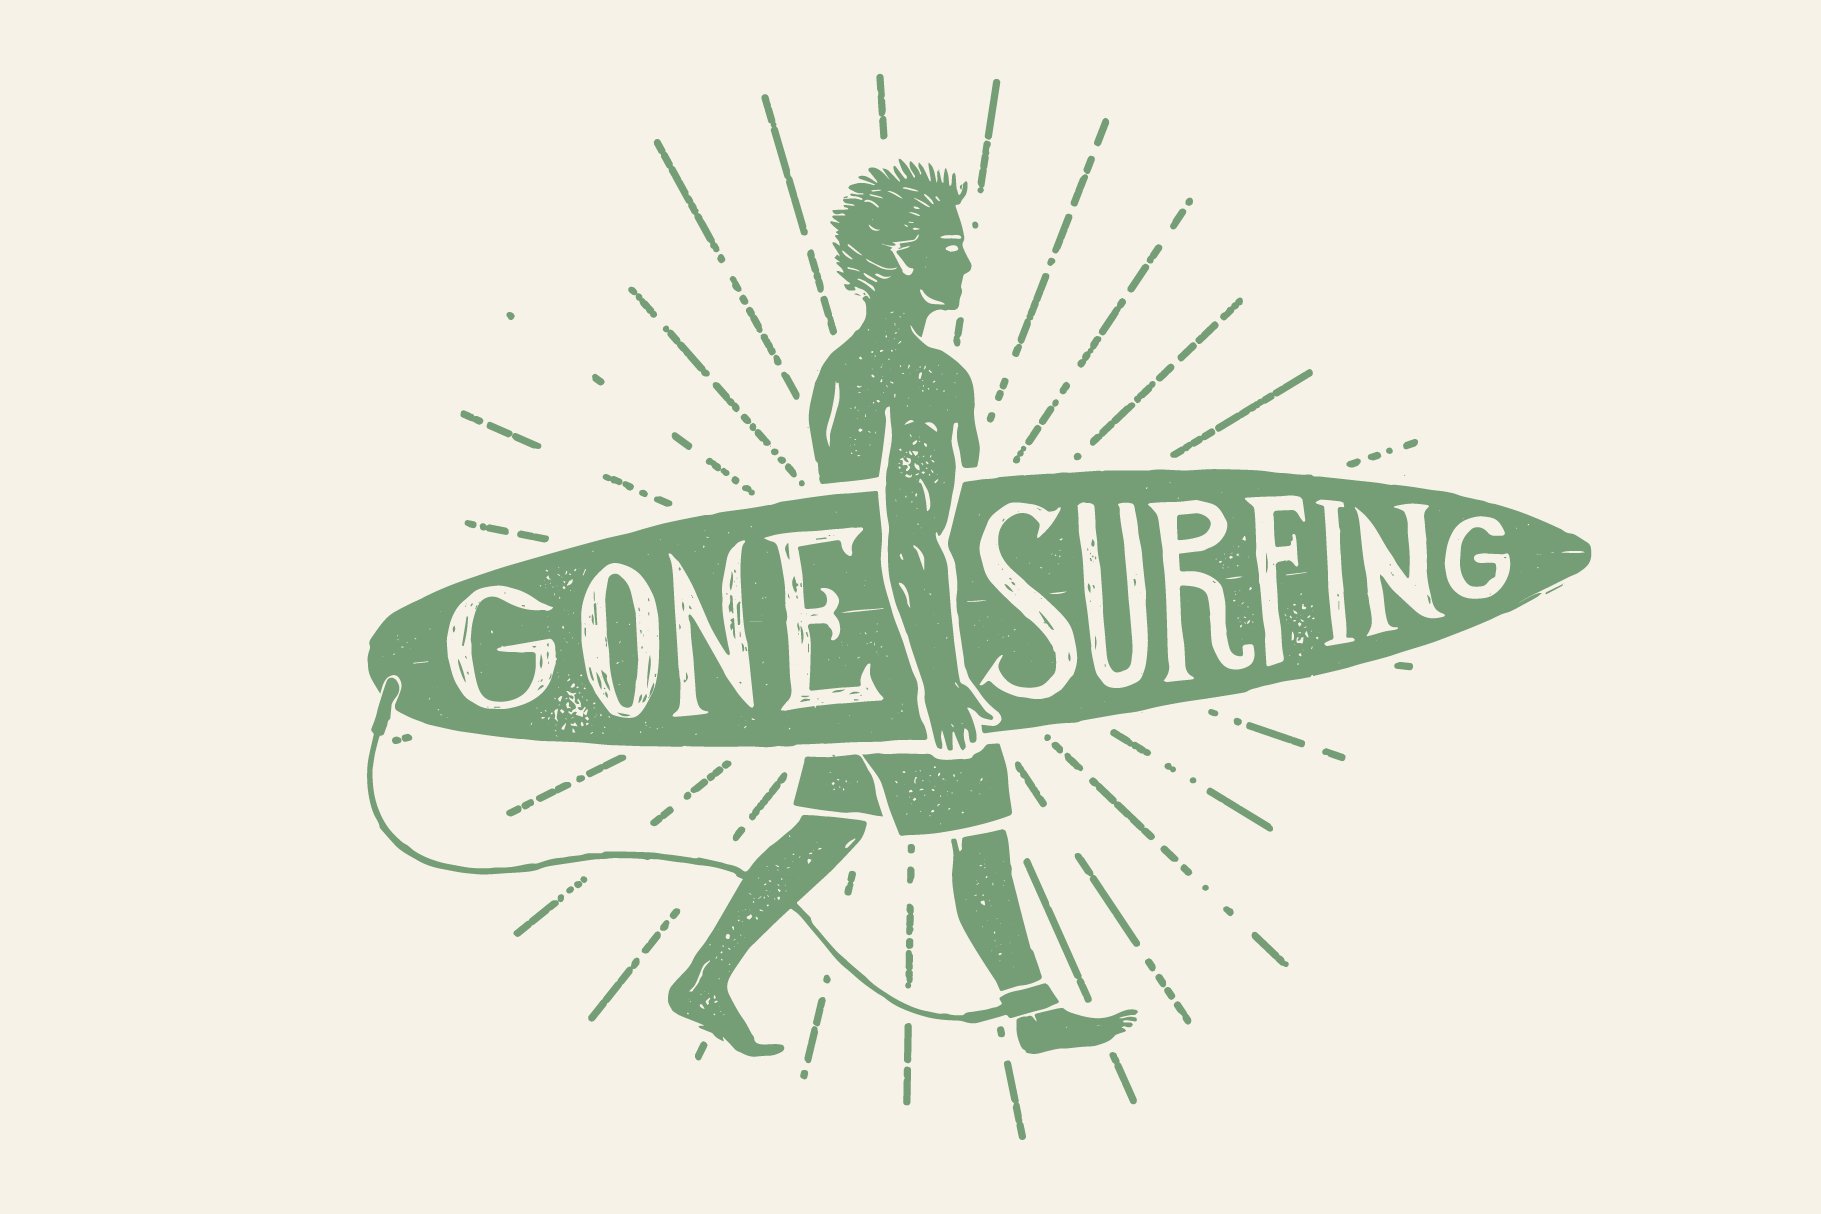 Gone Surfing cover image.